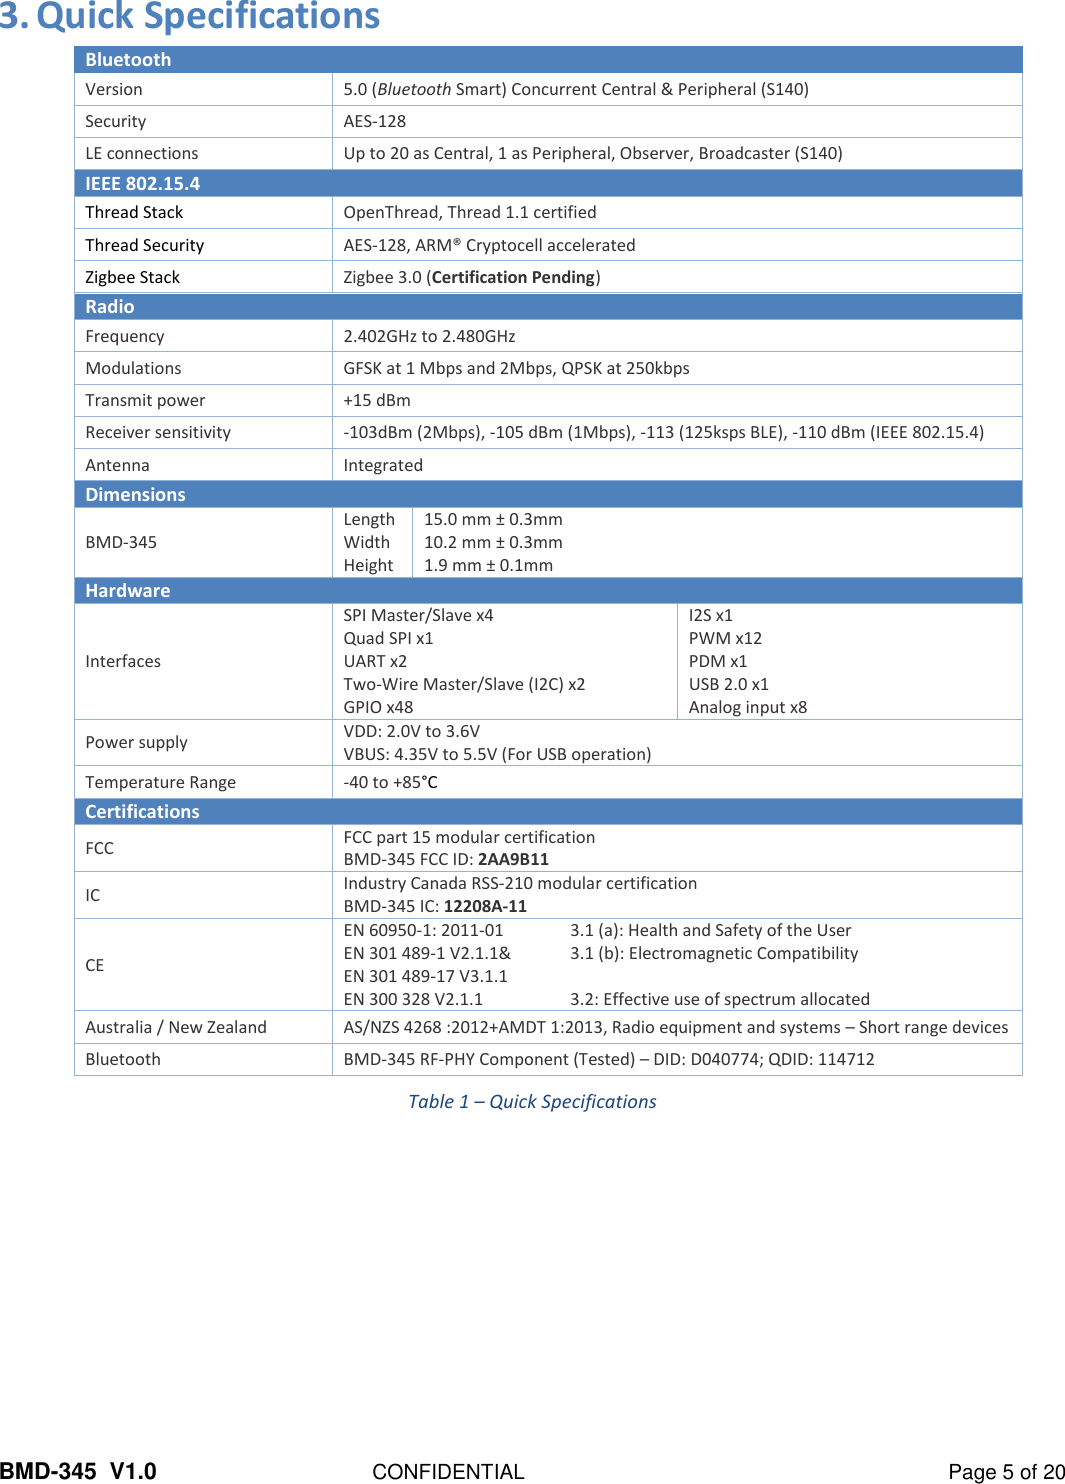 BMD-345  V1.0  CONFIDENTIAL  Page 5 of 20 3. Quick Specifications  Bluetooth Version 5.0 (Bluetooth Smart) Concurrent Central &amp; Peripheral (S140) Security AES-128 LE connections Up to 20 as Central, 1 as Peripheral, Observer, Broadcaster (S140) IEEE 802.15.4 Thread Stack OpenThread, Thread 1.1 certified Thread Security AES-128, ARM® Cryptocell accelerated Zigbee Stack Zigbee 3.0 (Certification Pending) Radio Frequency 2.402GHz to 2.480GHz Modulations GFSK at 1 Mbps and 2Mbps, QPSK at 250kbps Transmit power +15 dBm Receiver sensitivity -103dBm (2Mbps), -105 dBm (1Mbps), -113 (125ksps BLE), -110 dBm (IEEE 802.15.4) Antenna  Integrated Dimensions BMD-345 Length Width Height 15.0 mm ± 0.3mm 10.2 mm ± 0.3mm 1.9 mm ± 0.1mm Hardware Interfaces SPI Master/Slave x4 Quad SPI x1 UART x2 Two-Wire Master/Slave (I2C) x2 GPIO x48 I2S x1 PWM x12 PDM x1 USB 2.0 x1 Analog input x8 Power supply VDD: 2.0V to 3.6V VBUS: 4.35V to 5.5V (For USB operation) Temperature Range -40 to +85°C Certifications FCC FCC part 15 modular certification BMD-345 FCC ID: 2AA9B11 IC Industry Canada RSS-210 modular certification BMD-345 IC: 12208A-11 CE EN 60950-1: 2011-01  3.1 (a): Health and Safety of the User EN 301 489-1 V2.1.1&amp;  3.1 (b): Electromagnetic Compatibility EN 301 489-17 V3.1.1   EN 300 328 V2.1.1  3.2: Effective use of spectrum allocated Australia / New Zealand AS/NZS 4268 :2012+AMDT 1:2013, Radio equipment and systems – Short range devices Bluetooth BMD-345 RF-PHY Component (Tested) – DID: D040774; QDID: 114712 Table 1 – Quick Specifications   